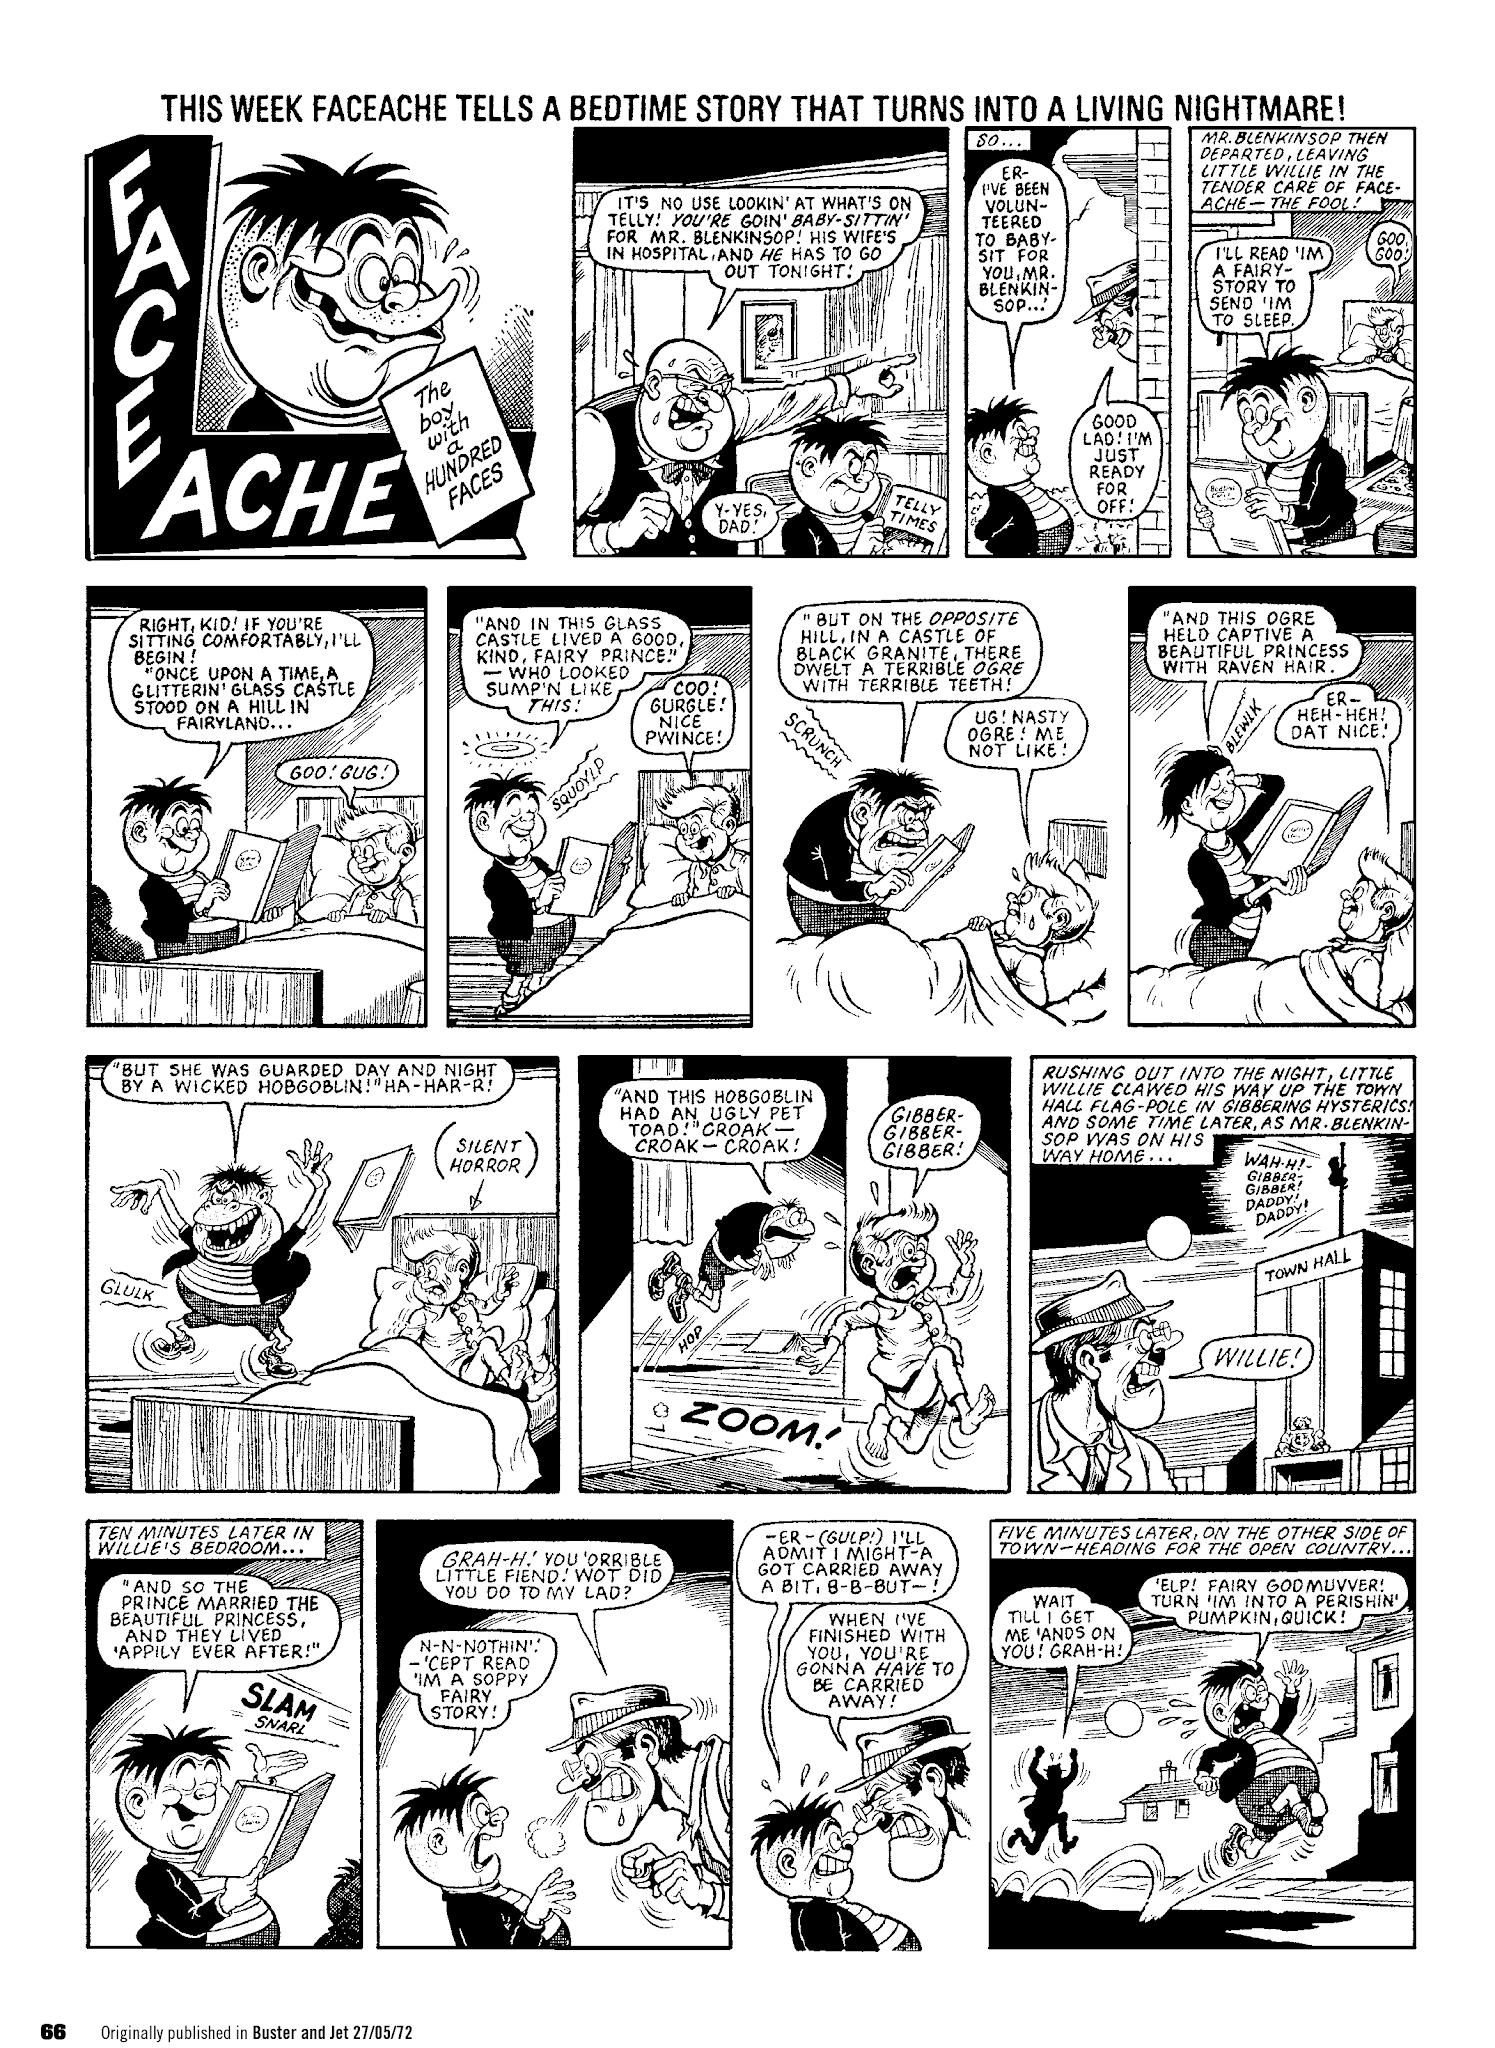 Read online Faceache: The First Hundred Scrunges comic -  Issue # TPB 1 - 68